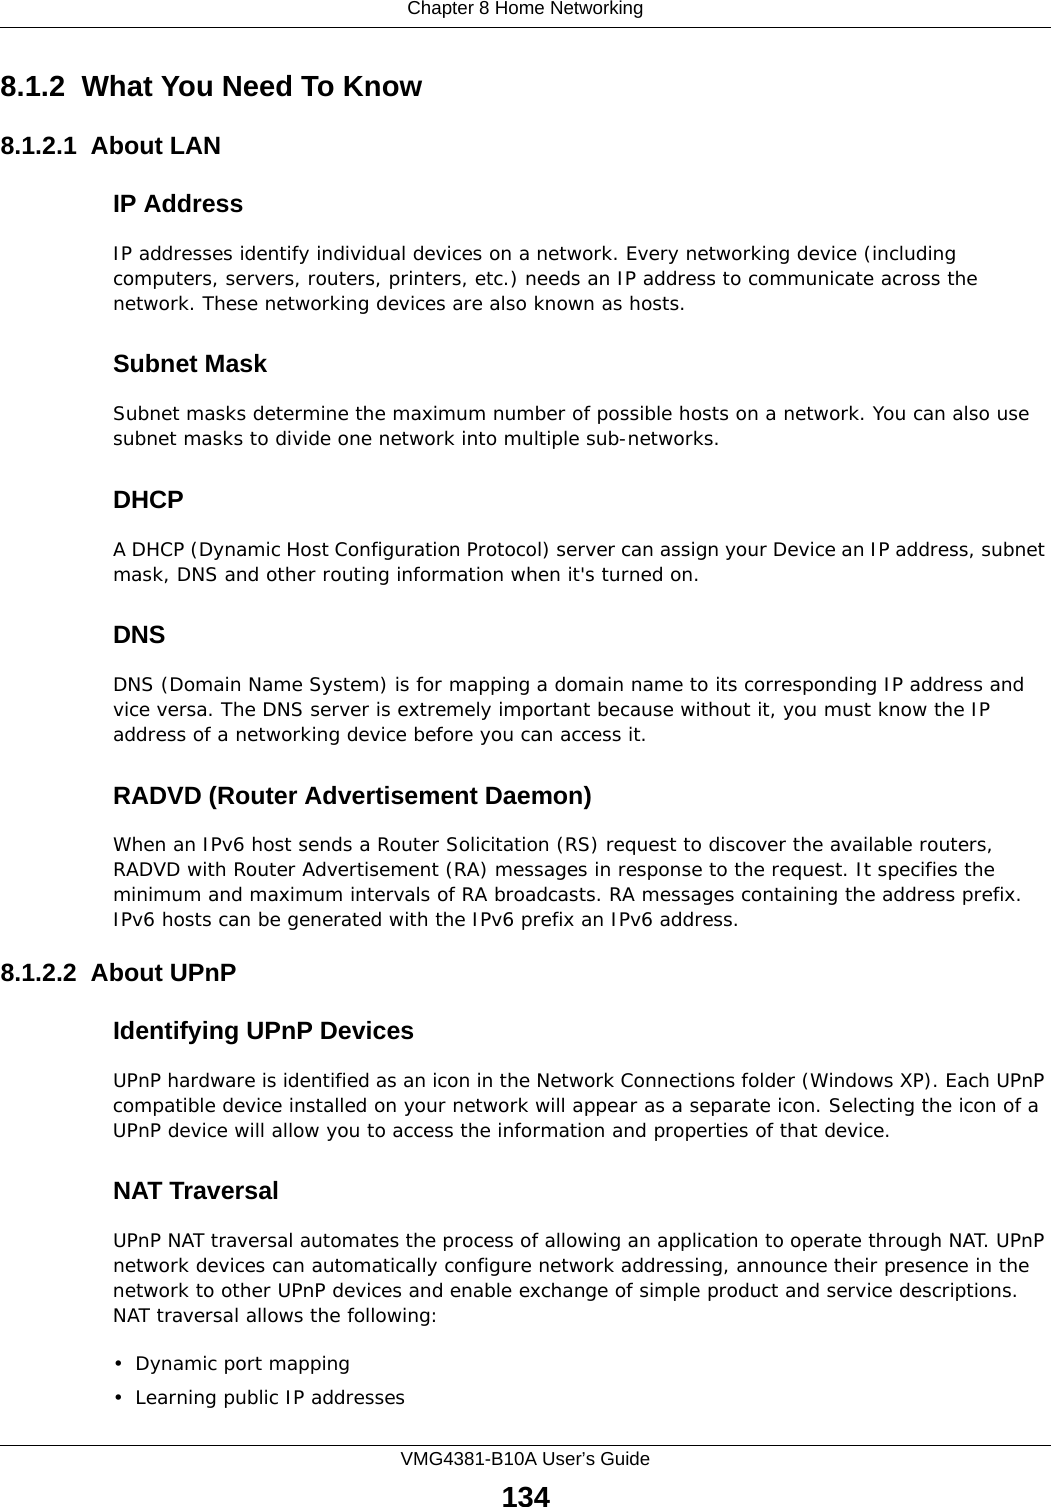 Chapter 8 Home NetworkingVMG4381-B10A User’s Guide1348.1.2  What You Need To Know8.1.2.1  About LANIP AddressIP addresses identify individual devices on a network. Every networking device (including computers, servers, routers, printers, etc.) needs an IP address to communicate across the network. These networking devices are also known as hosts.Subnet MaskSubnet masks determine the maximum number of possible hosts on a network. You can also use subnet masks to divide one network into multiple sub-networks.DHCPA DHCP (Dynamic Host Configuration Protocol) server can assign your Device an IP address, subnet mask, DNS and other routing information when it&apos;s turned on.DNSDNS (Domain Name System) is for mapping a domain name to its corresponding IP address and vice versa. The DNS server is extremely important because without it, you must know the IP address of a networking device before you can access it.RADVD (Router Advertisement Daemon)When an IPv6 host sends a Router Solicitation (RS) request to discover the available routers, RADVD with Router Advertisement (RA) messages in response to the request. It specifies the minimum and maximum intervals of RA broadcasts. RA messages containing the address prefix. IPv6 hosts can be generated with the IPv6 prefix an IPv6 address.8.1.2.2  About UPnPIdentifying UPnP DevicesUPnP hardware is identified as an icon in the Network Connections folder (Windows XP). Each UPnP compatible device installed on your network will appear as a separate icon. Selecting the icon of a UPnP device will allow you to access the information and properties of that device. NAT TraversalUPnP NAT traversal automates the process of allowing an application to operate through NAT. UPnP network devices can automatically configure network addressing, announce their presence in the network to other UPnP devices and enable exchange of simple product and service descriptions. NAT traversal allows the following:• Dynamic port mapping• Learning public IP addresses